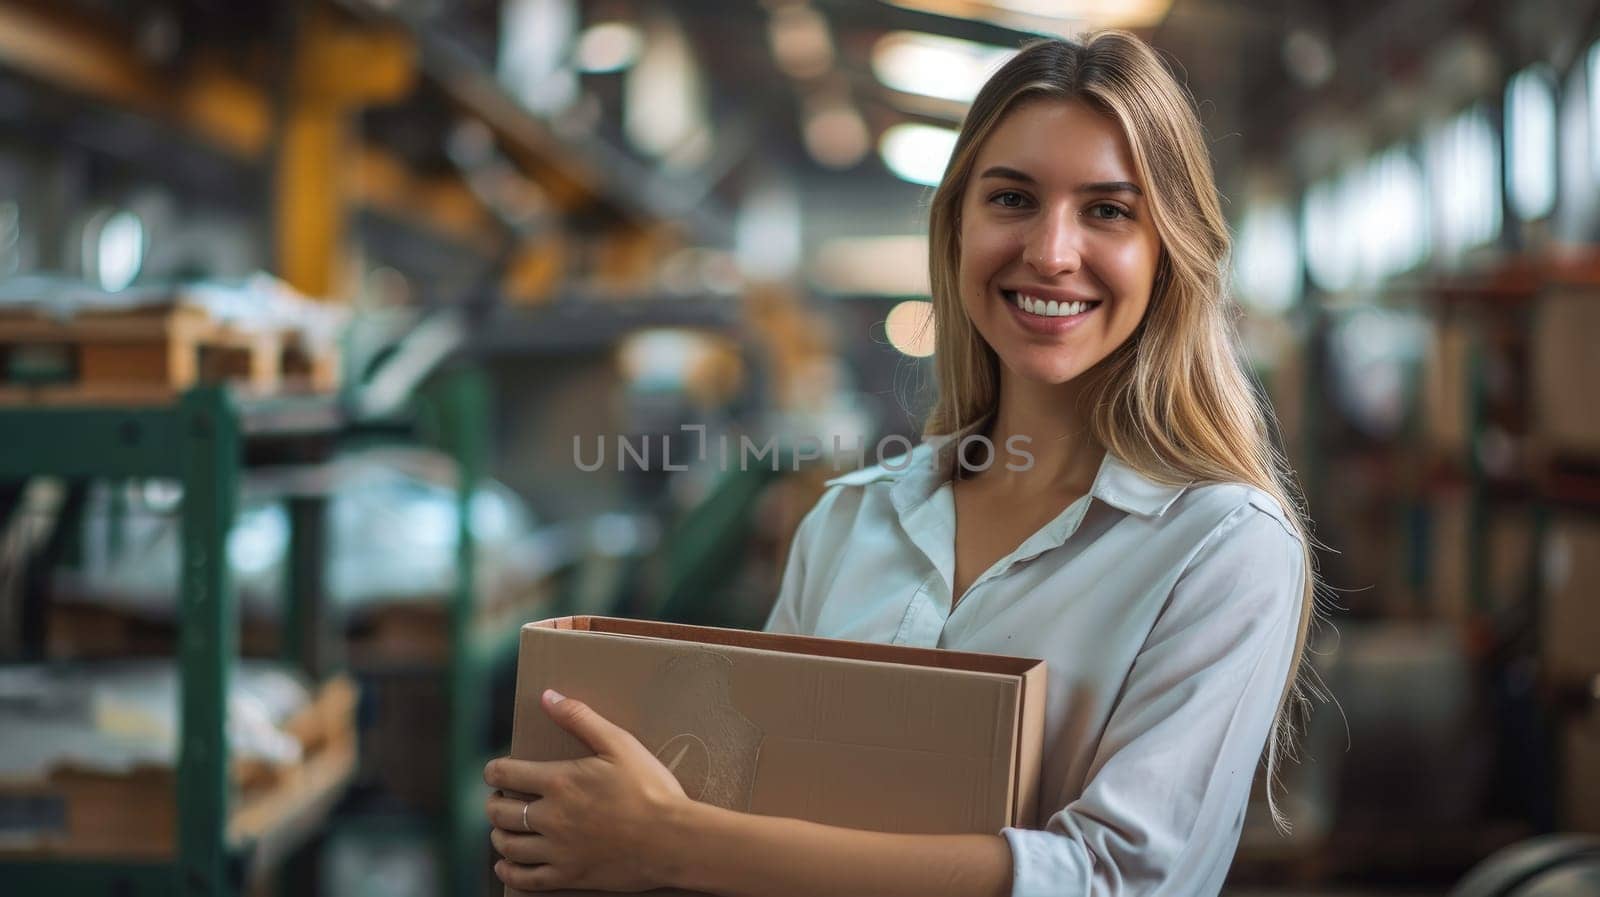 A professional businesswoman is holding a box inside a factory.